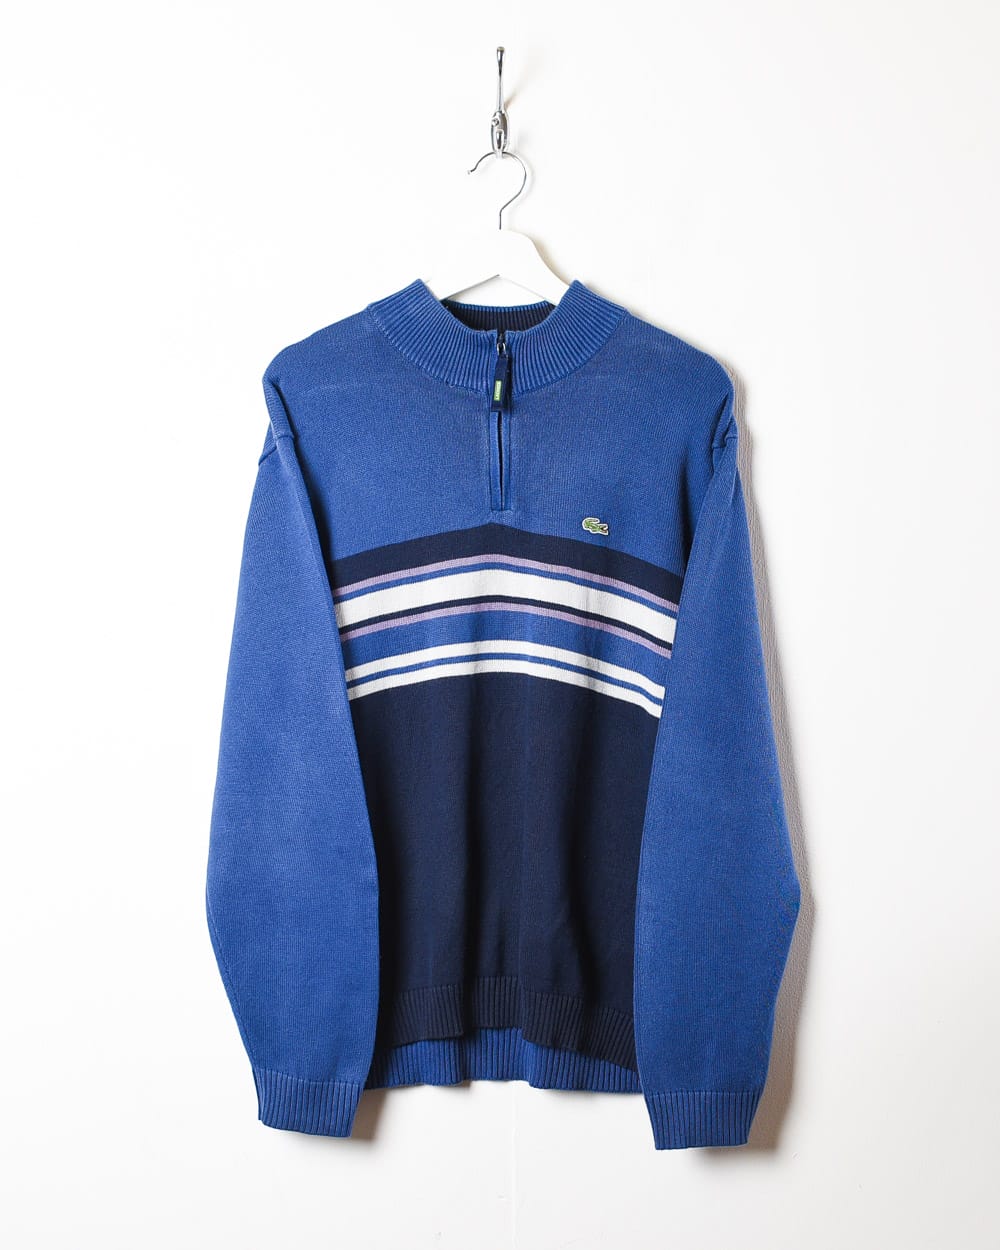 All 1/4 Zips – Domno Vintage